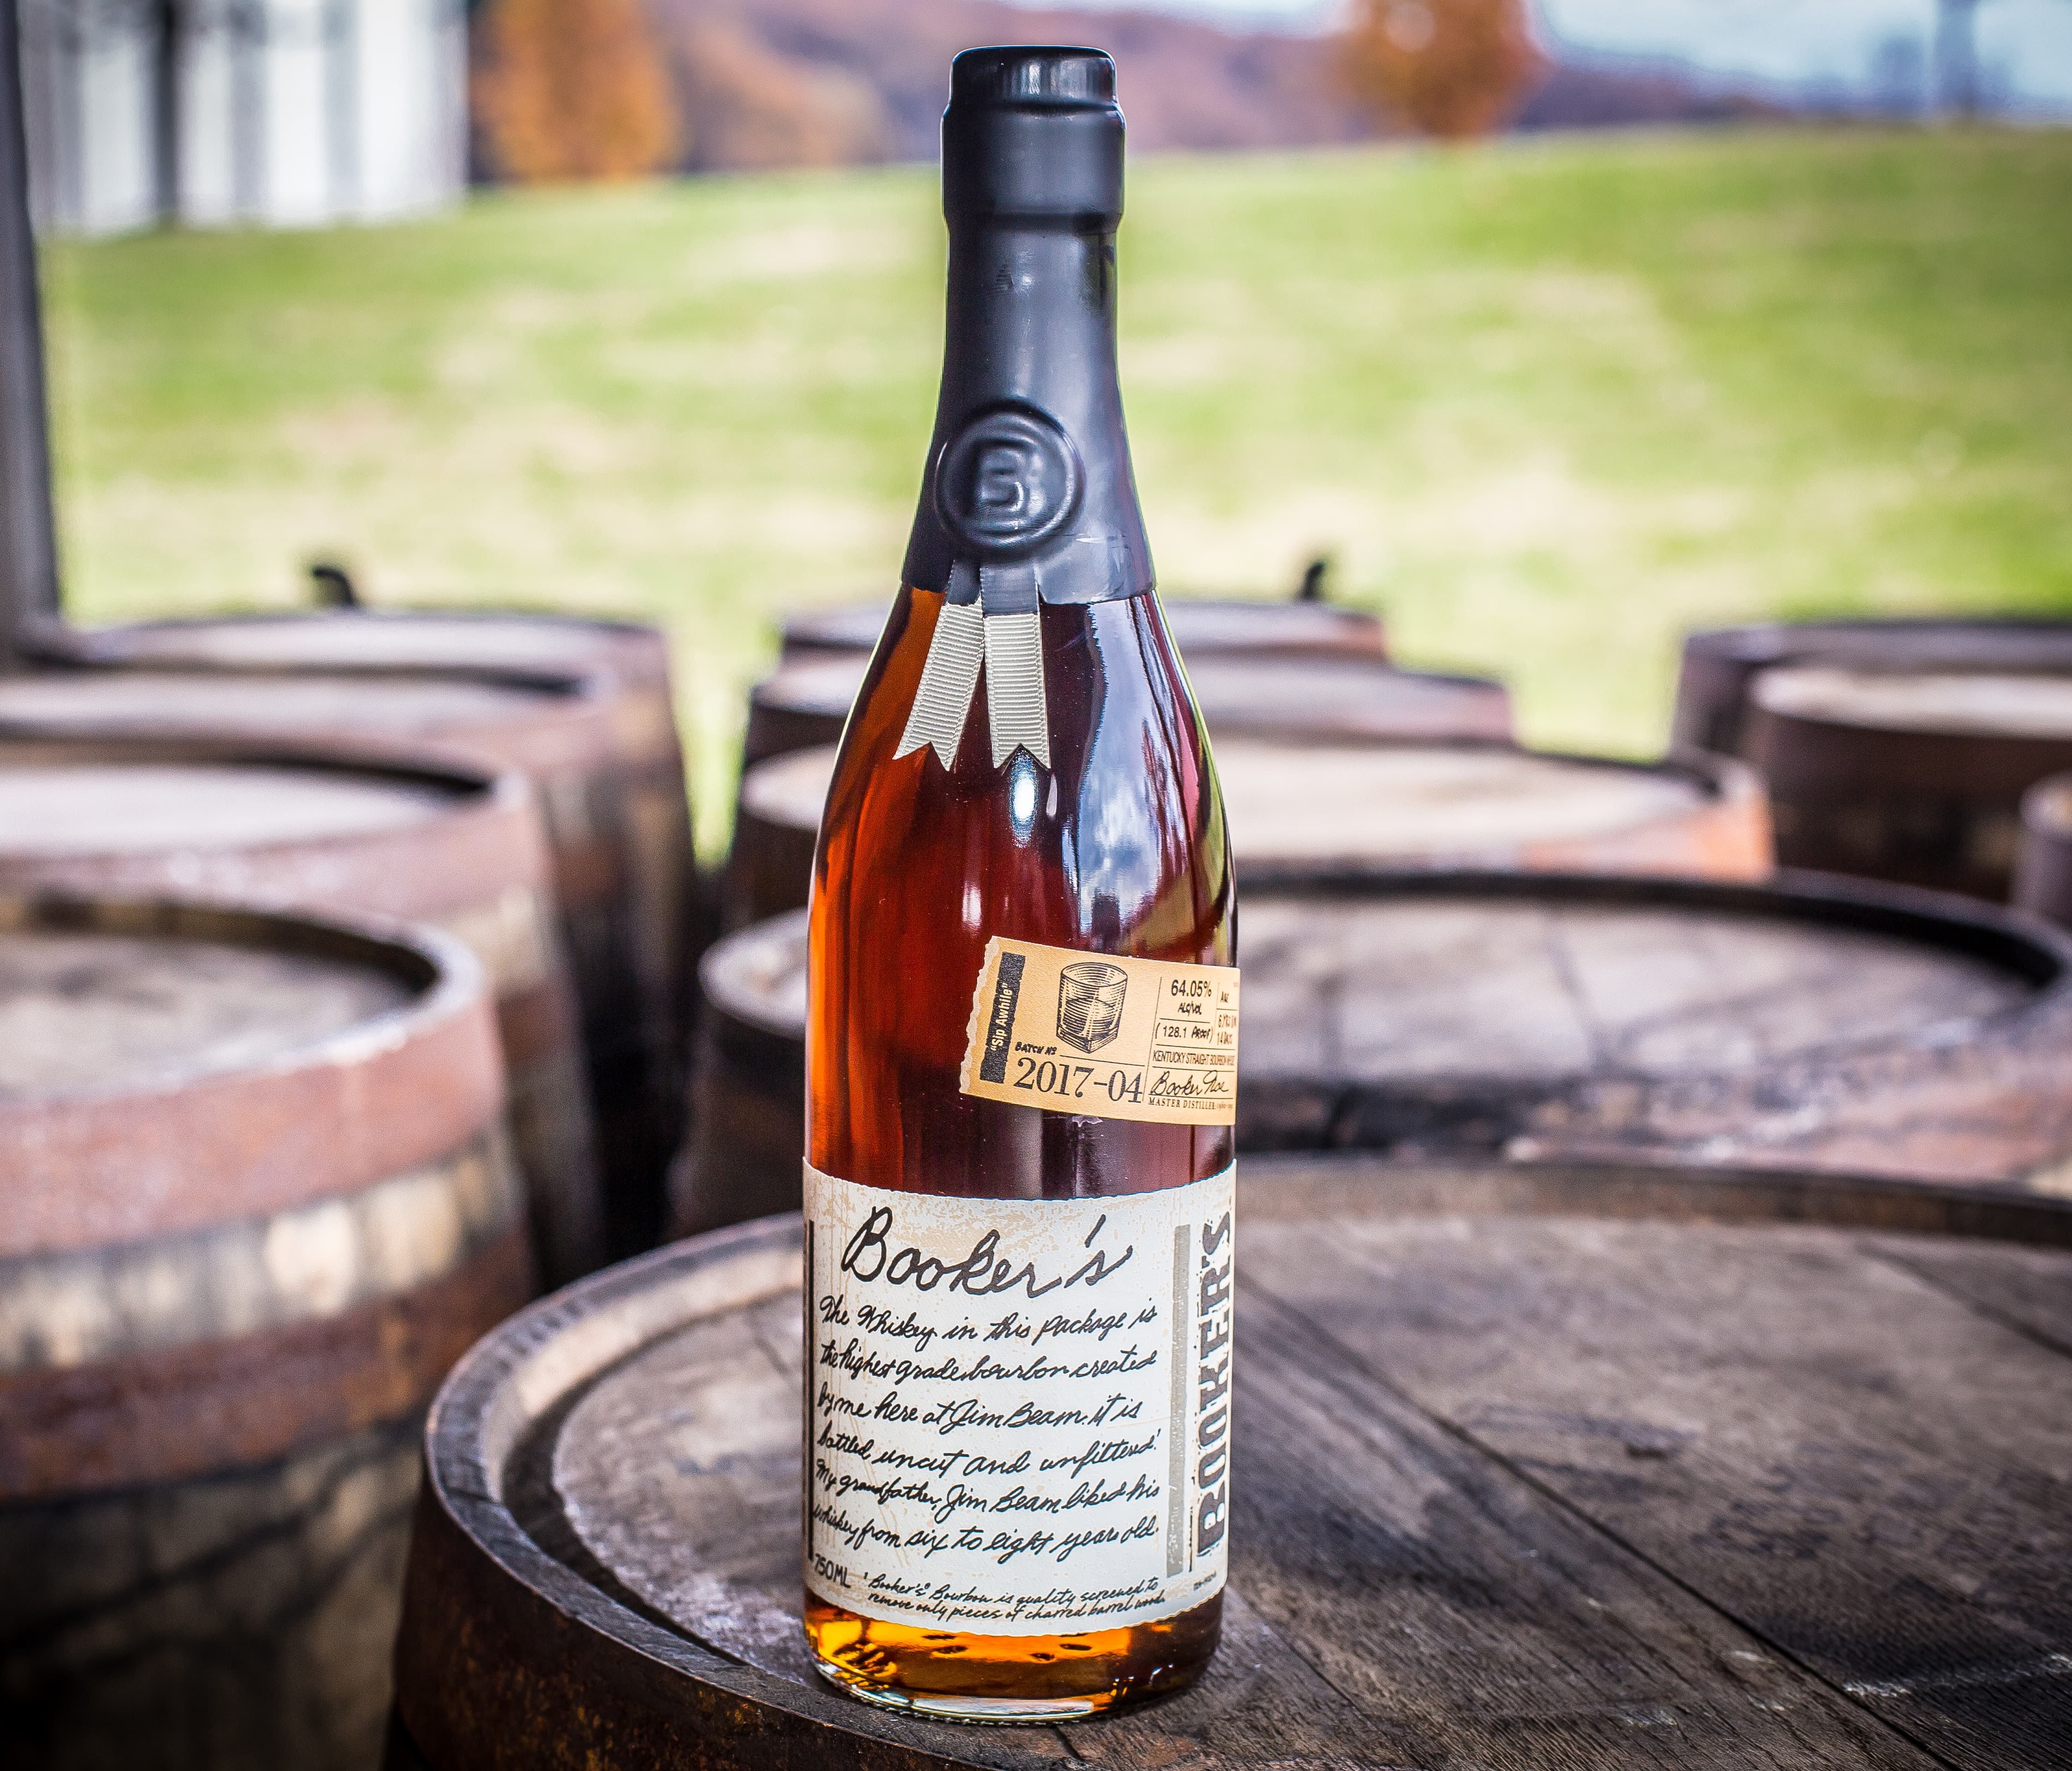 Booker's is the most potent of the Jim Beam small batch catalogue, with a barrel strength that usually veers upwards of 60% ABV. The fourth Booker's release of 2017, Sip Awhile ($70), is 128.1 proof, so it might be a good idea to add a splash of wate